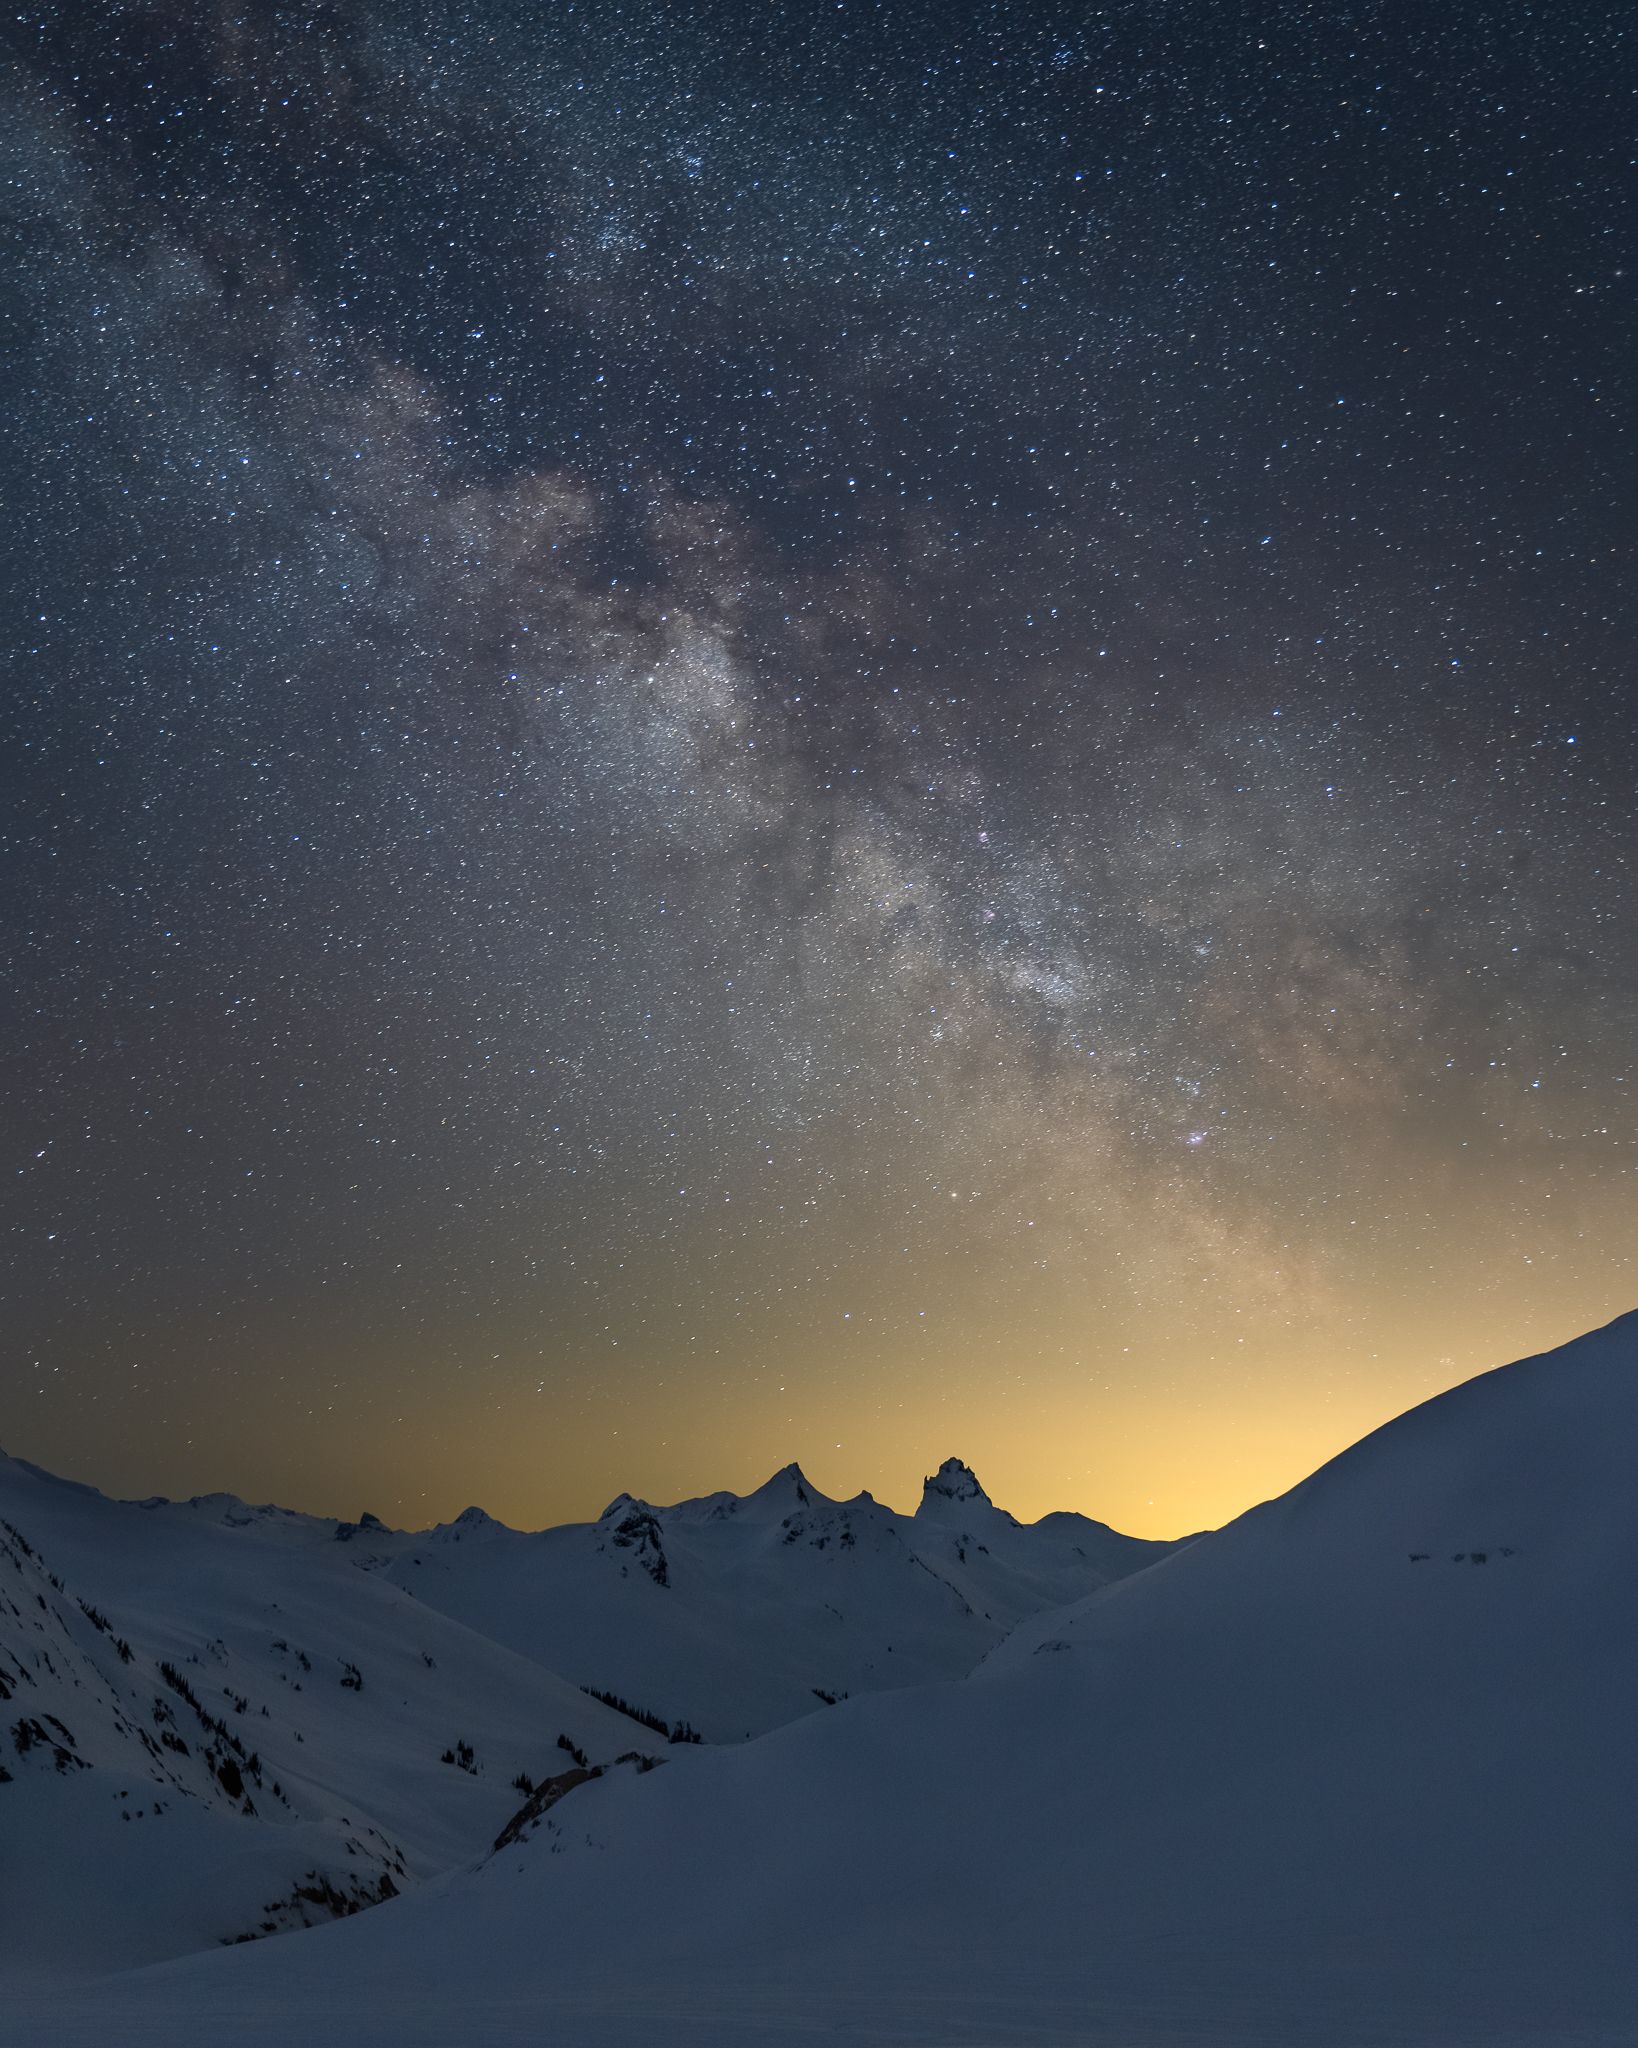 Milky way over Mt Fee, Whistler backcountry